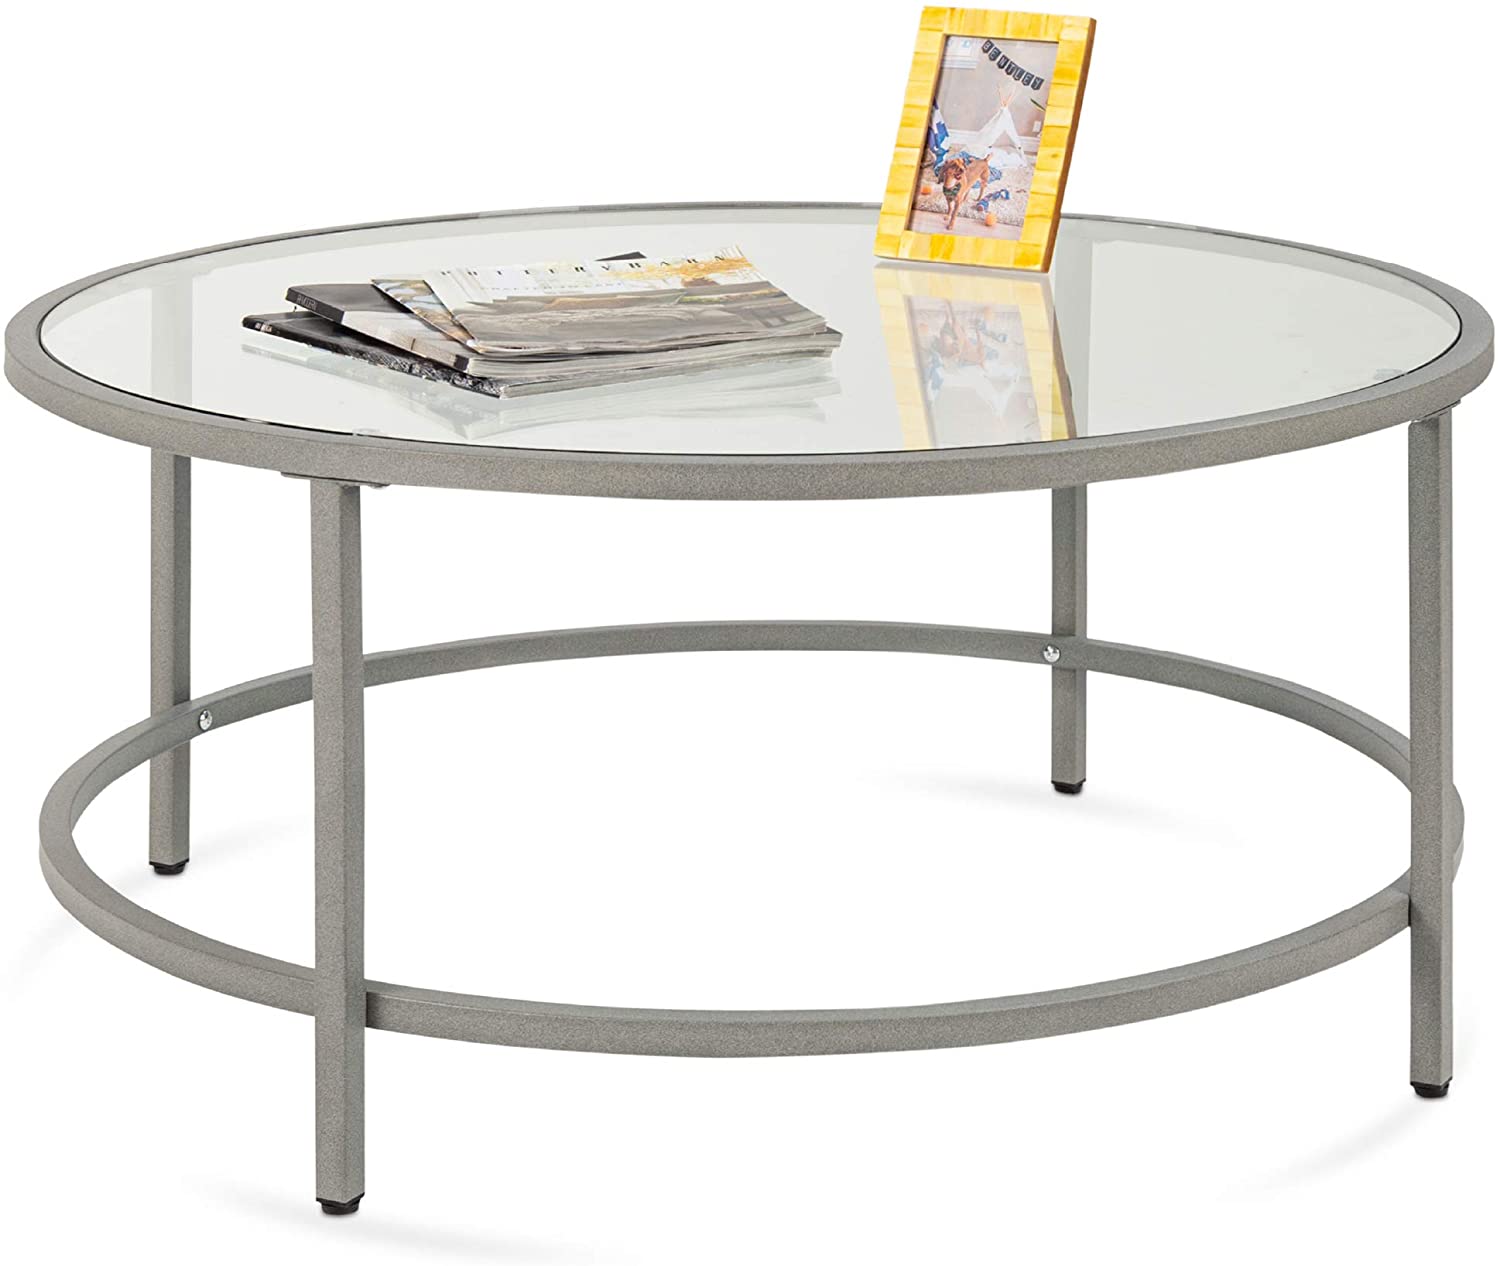 Modern Design Modern Round Tempered Glass Accent Side Coffee Table For Living Room